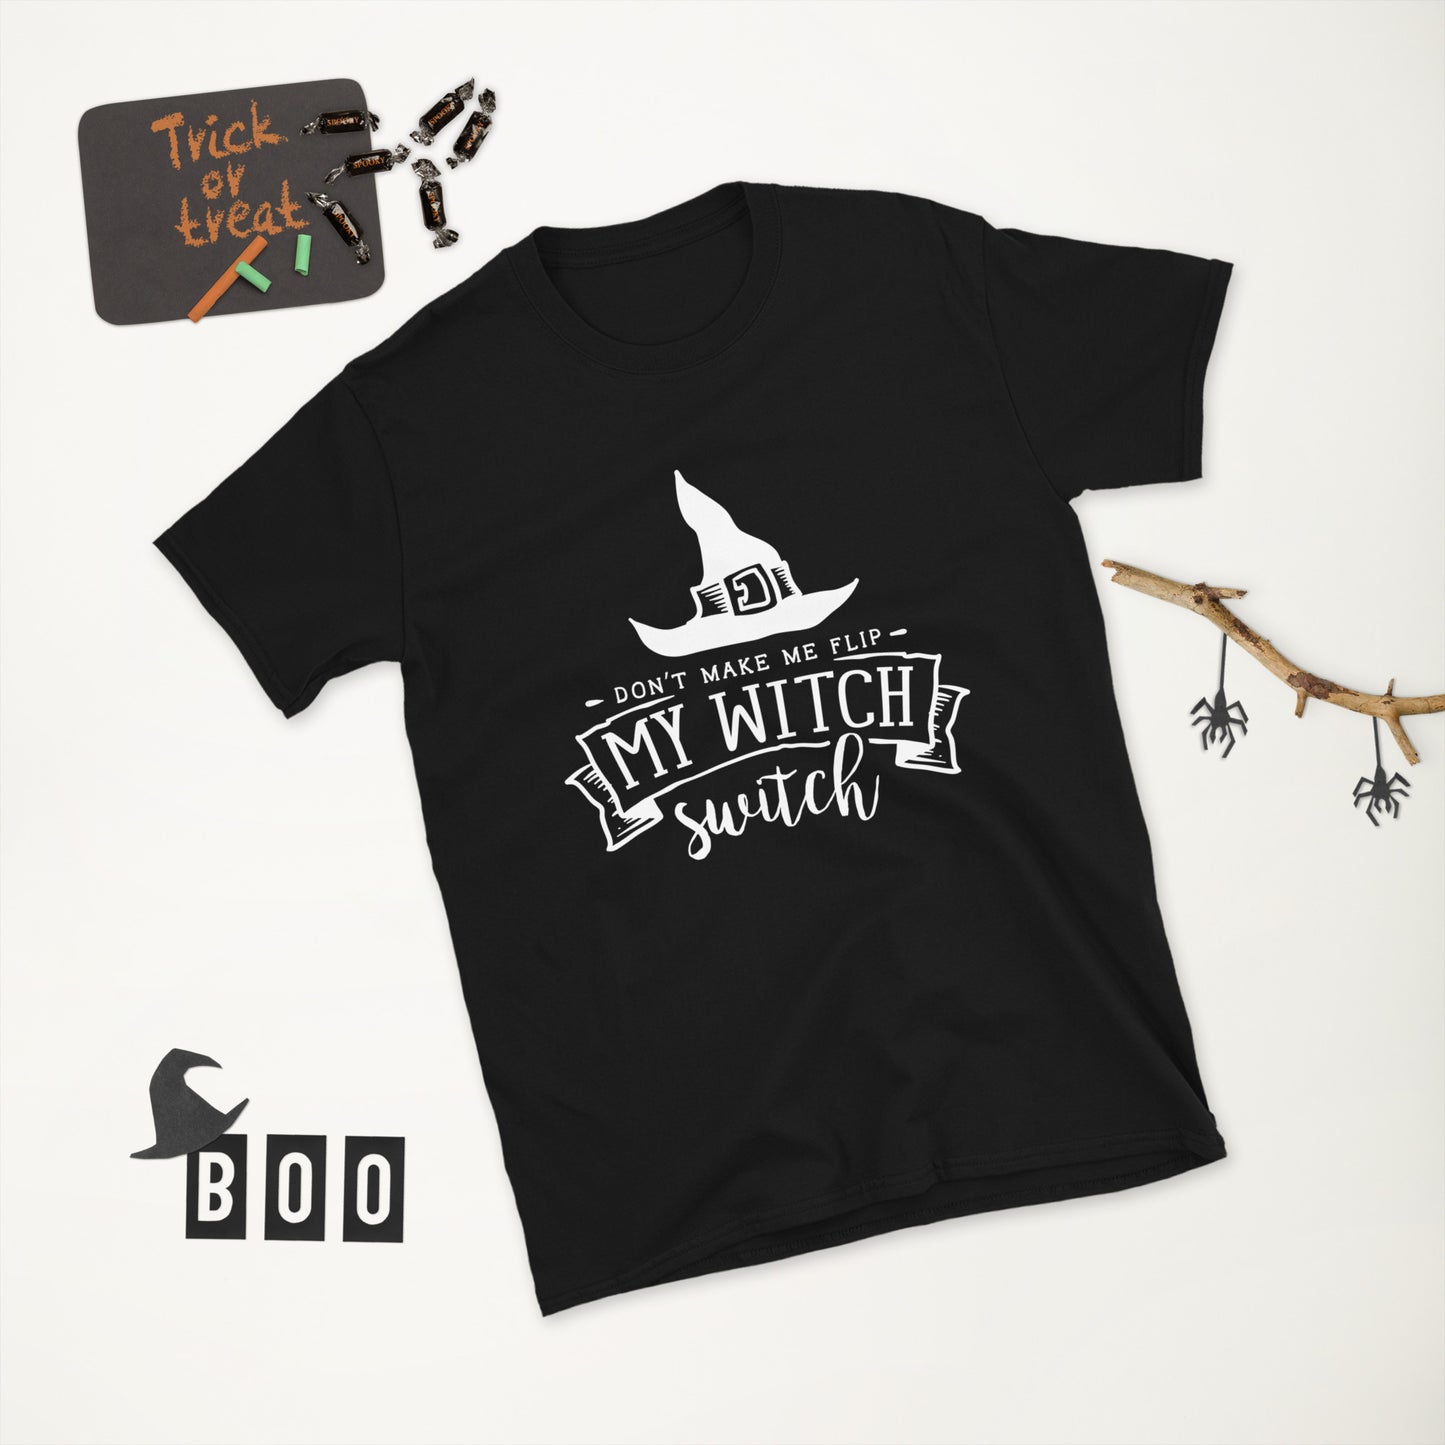 Don't Make Me Flip My Witch Switch Short-Sleeve Unisex T-Shirt.